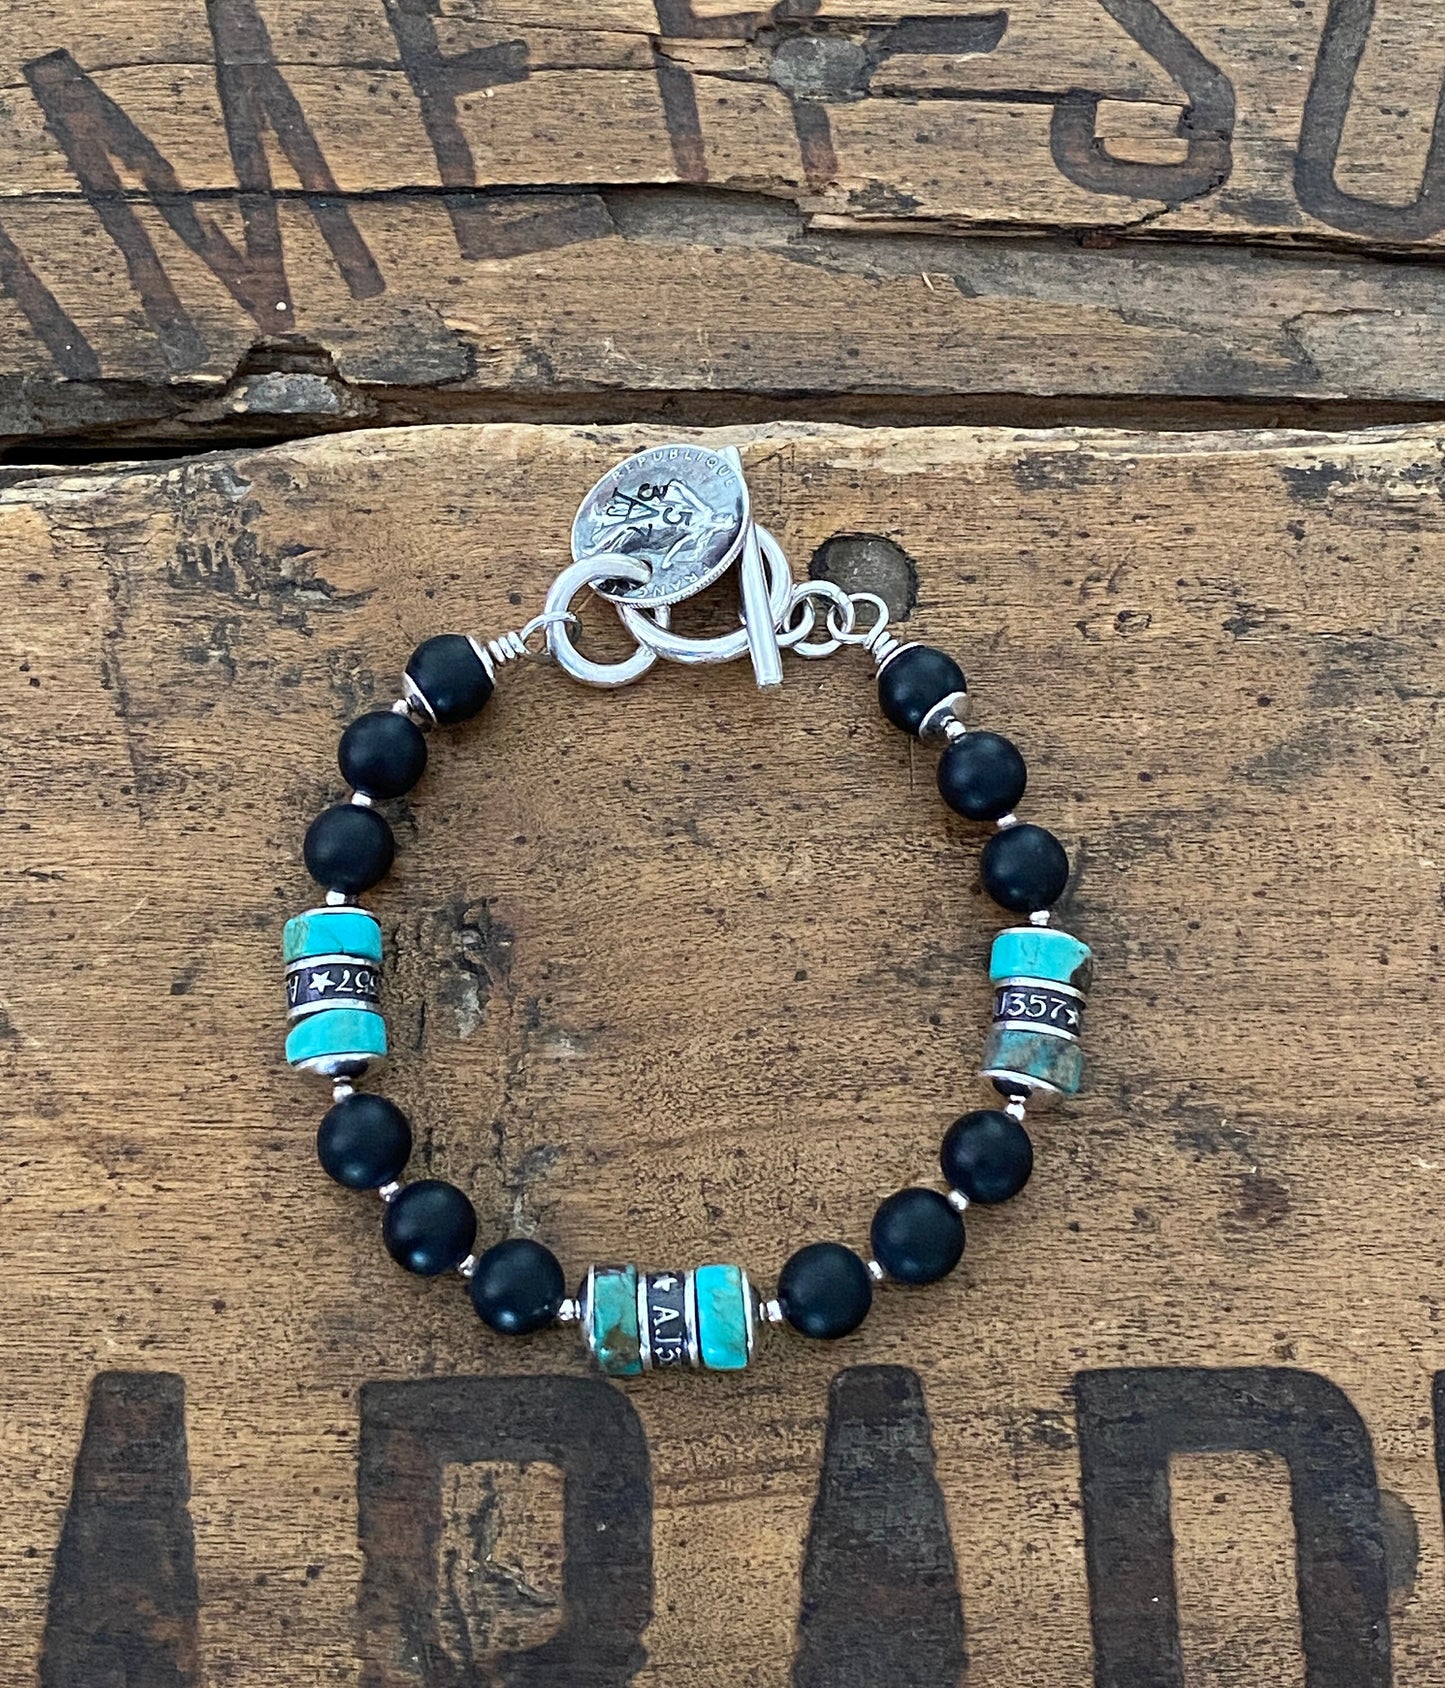 The Pacific Bracelet is made of, Turquoise, sterling silver, Vintage silver coin and Obsidian 8mm Beads.